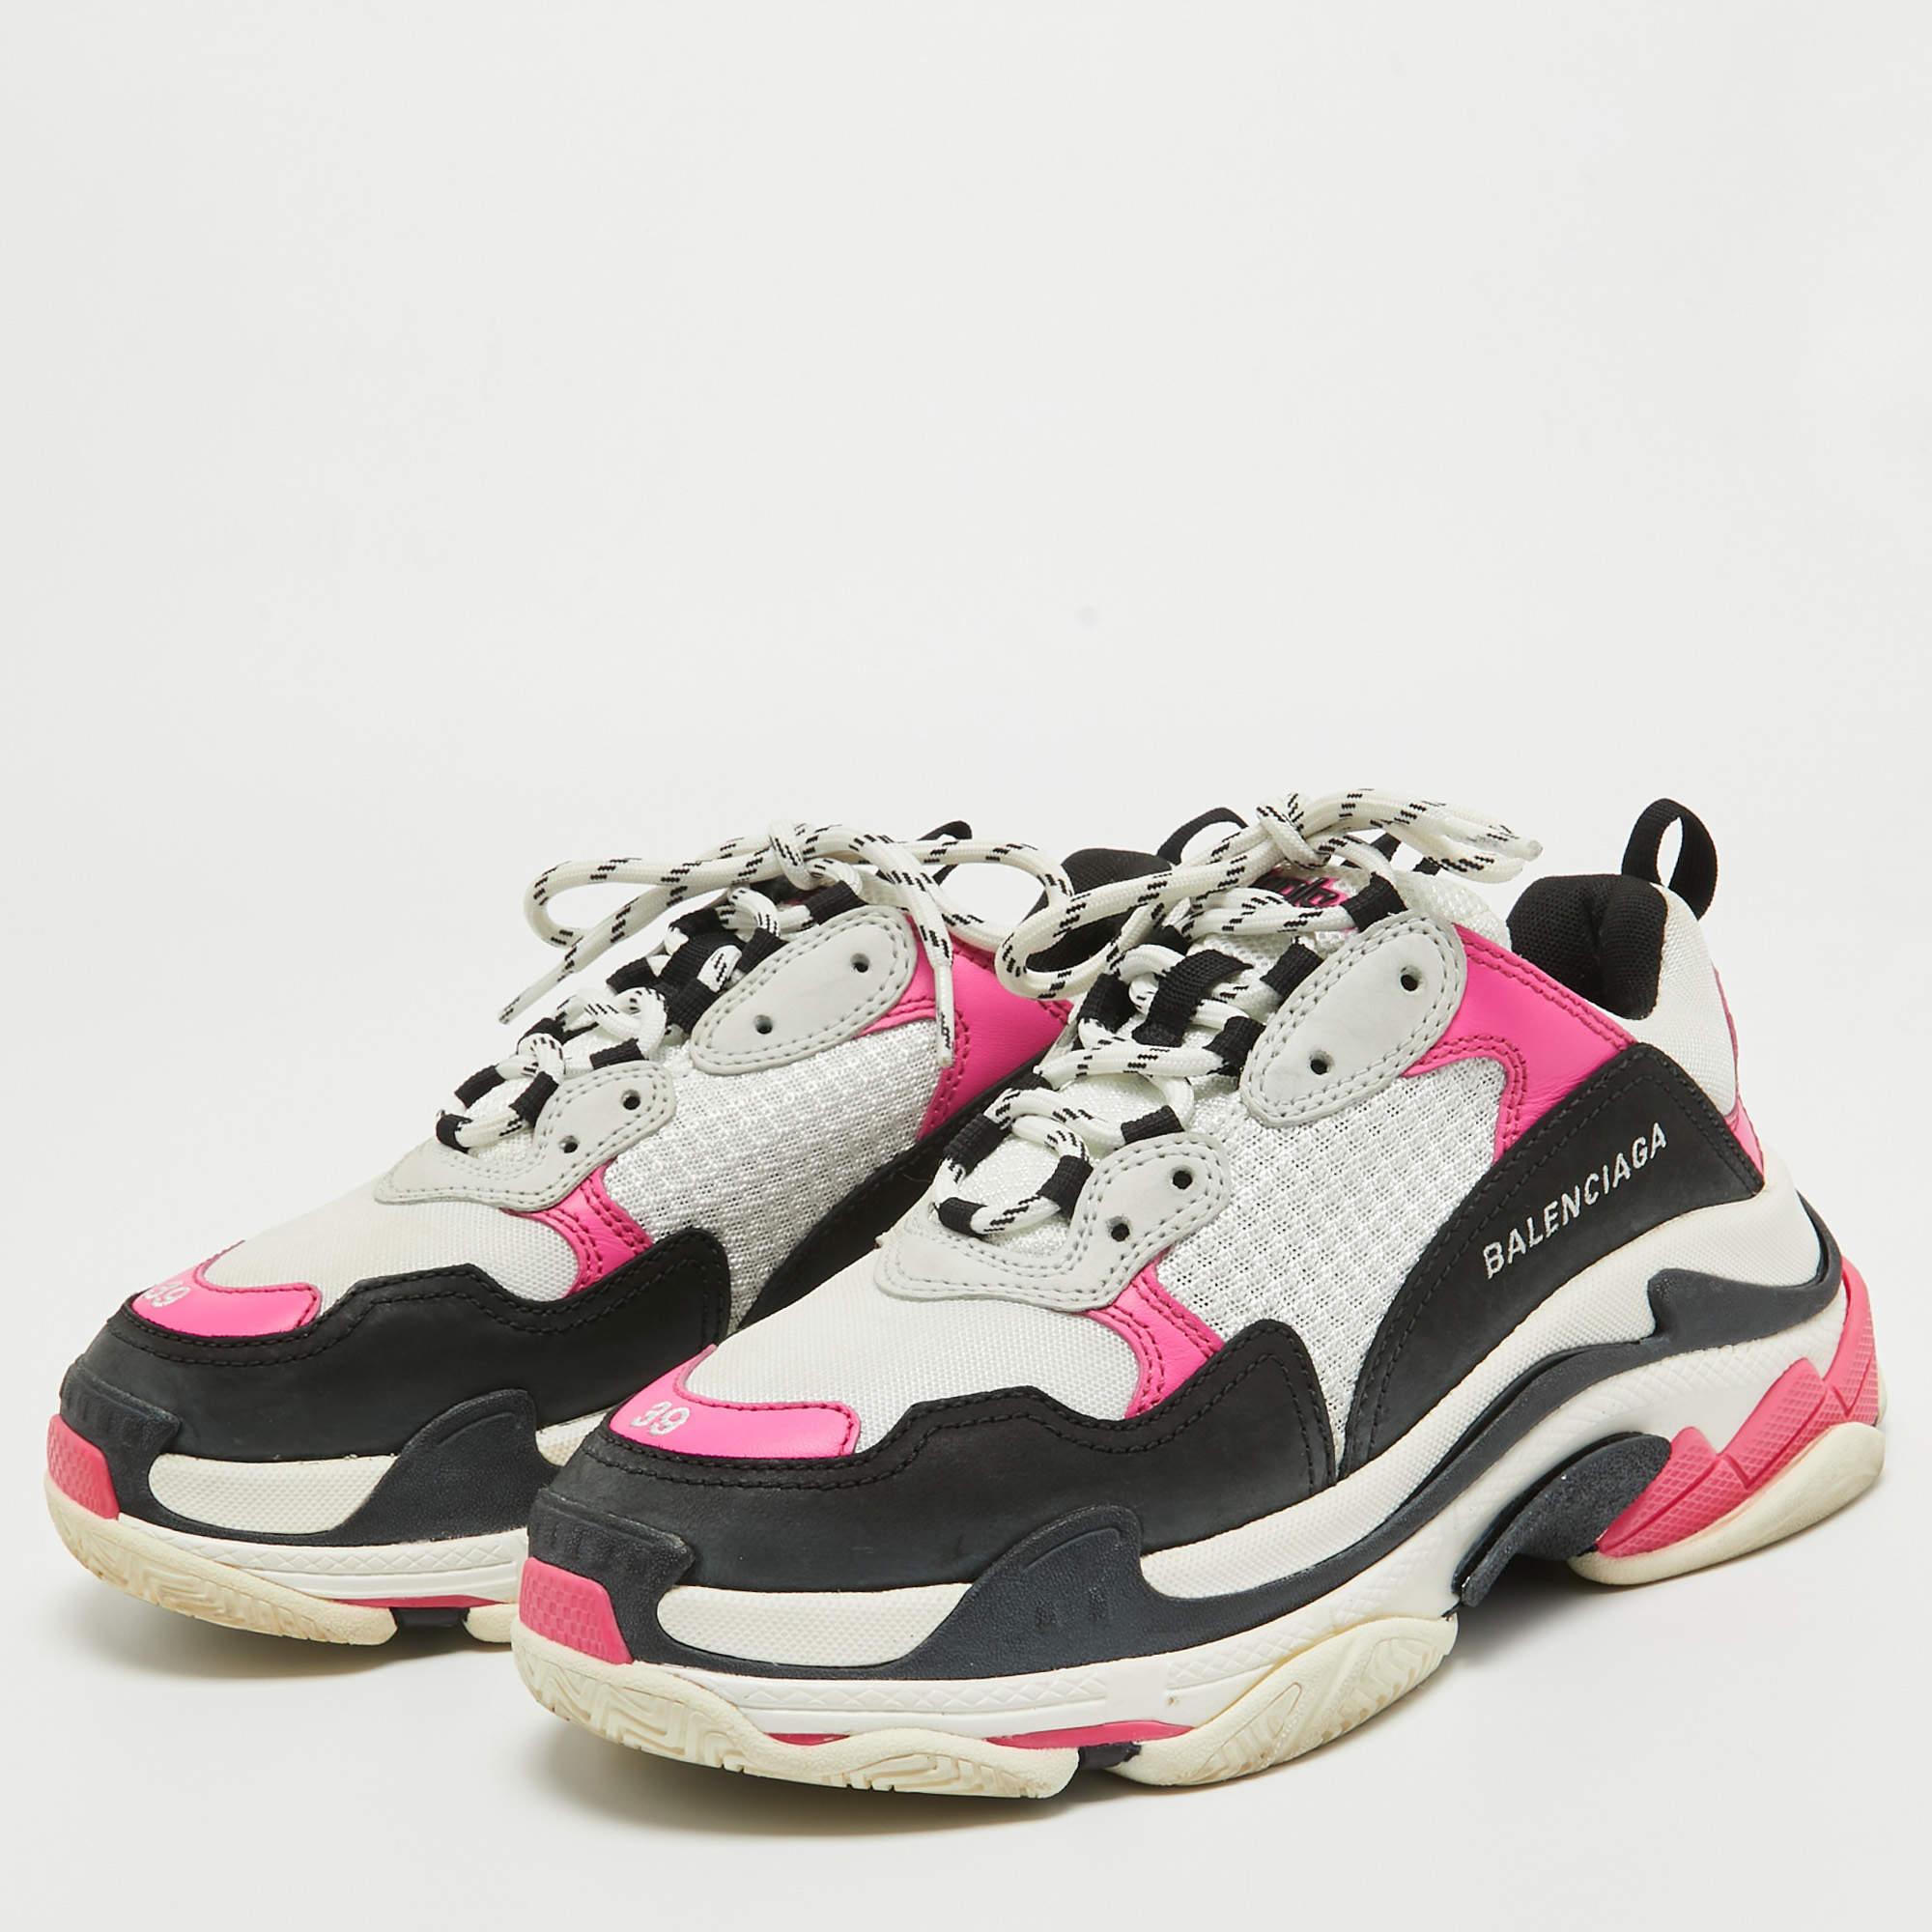 Balenciaga Multicolor Leather and Mesh Triple S Sneakers Size 39 For Sale 4